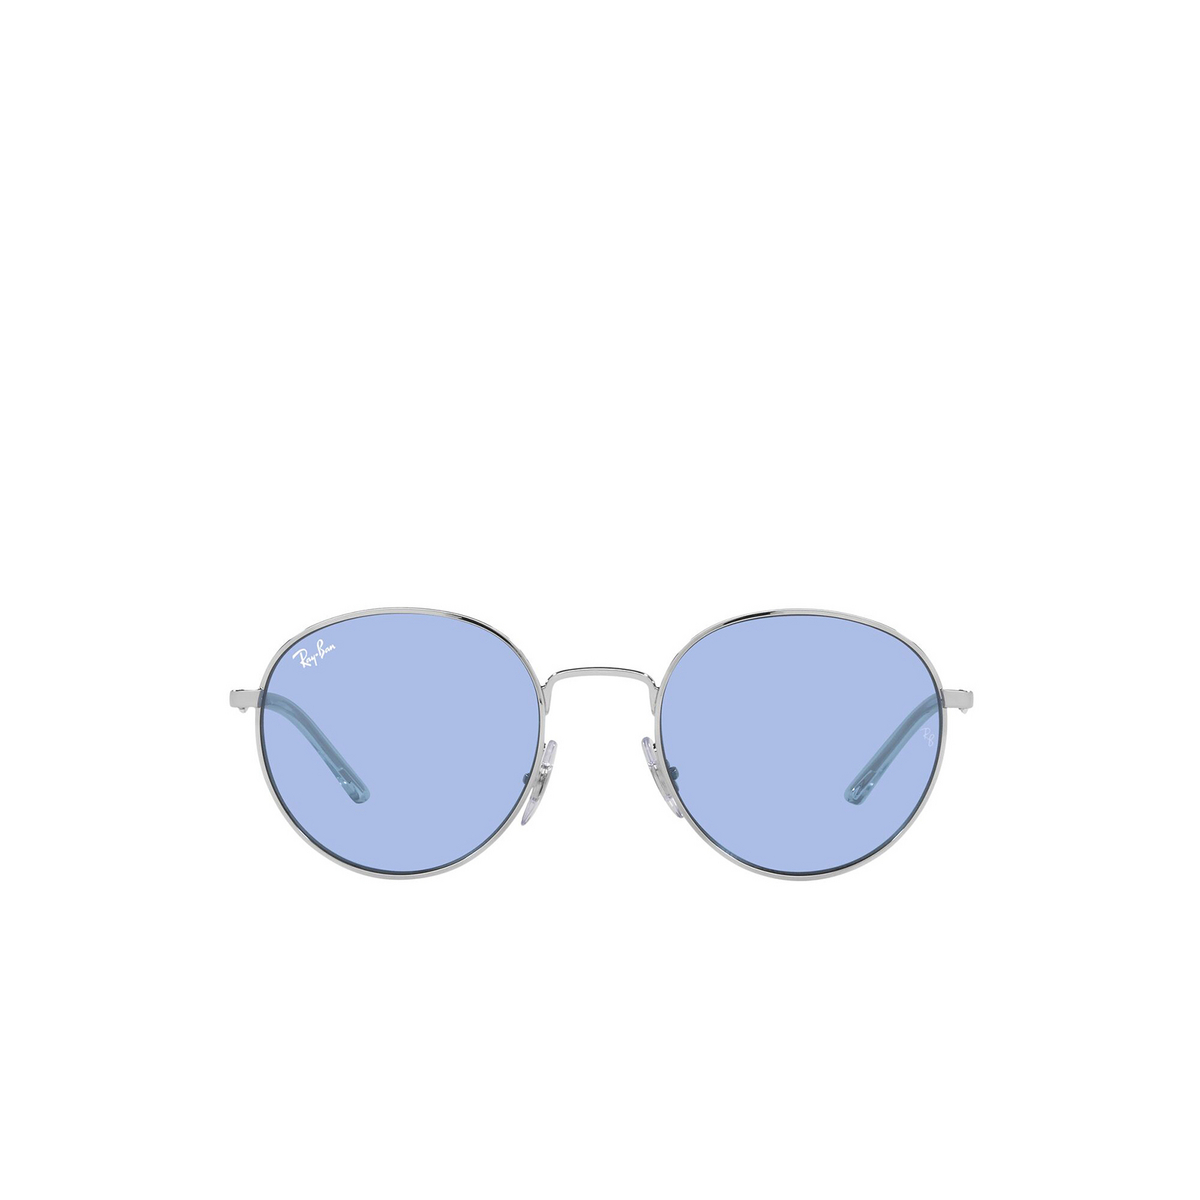 Ray-Ban® Round Sunglasses: RB3681 color Silver 003/80 - front view.